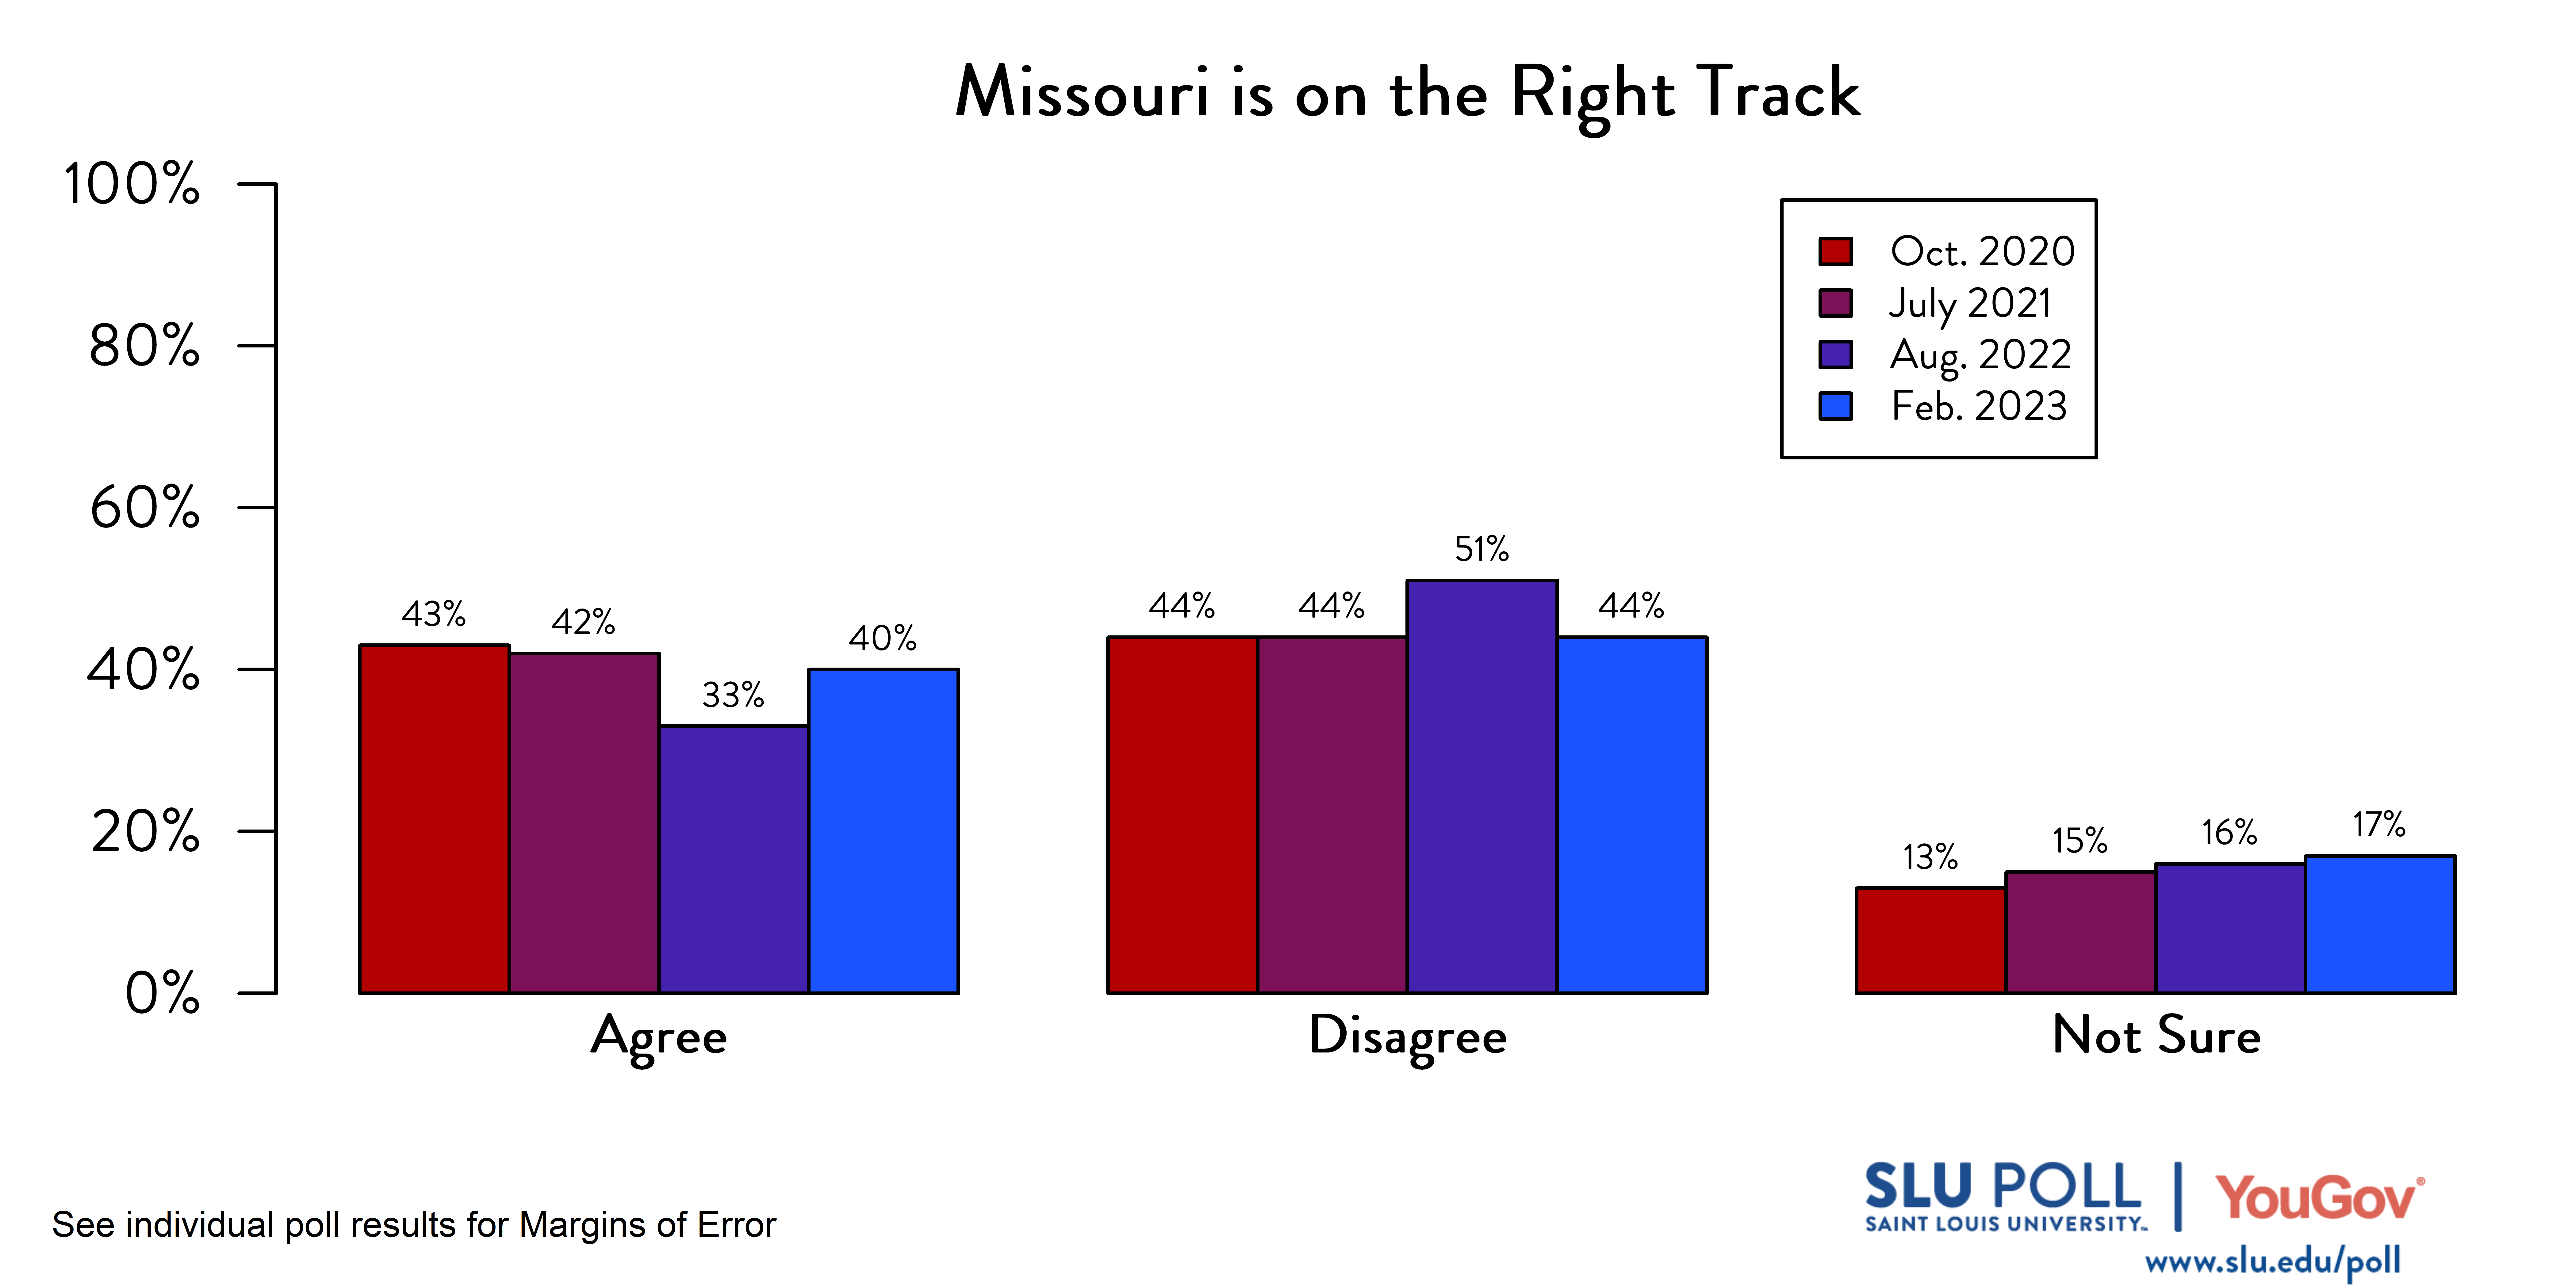 Likely voters' responses to 'Do you agree or disagree with the following statements: The State of Missouri is on the right track and headed in a good direction?': February 2023 Responses: 40% Agree, 44% Disagree, and 17% Not sure. August 2022 Responses:  33% Agree, 51% Disagree, and 16% Not Sure. July 2021 Responses:  42% Agree, 44% Disagree, and 15% Not Sure. Oct. 2020 Responses:  43% Agree, 44% Disagree, and 13% Not Sure.